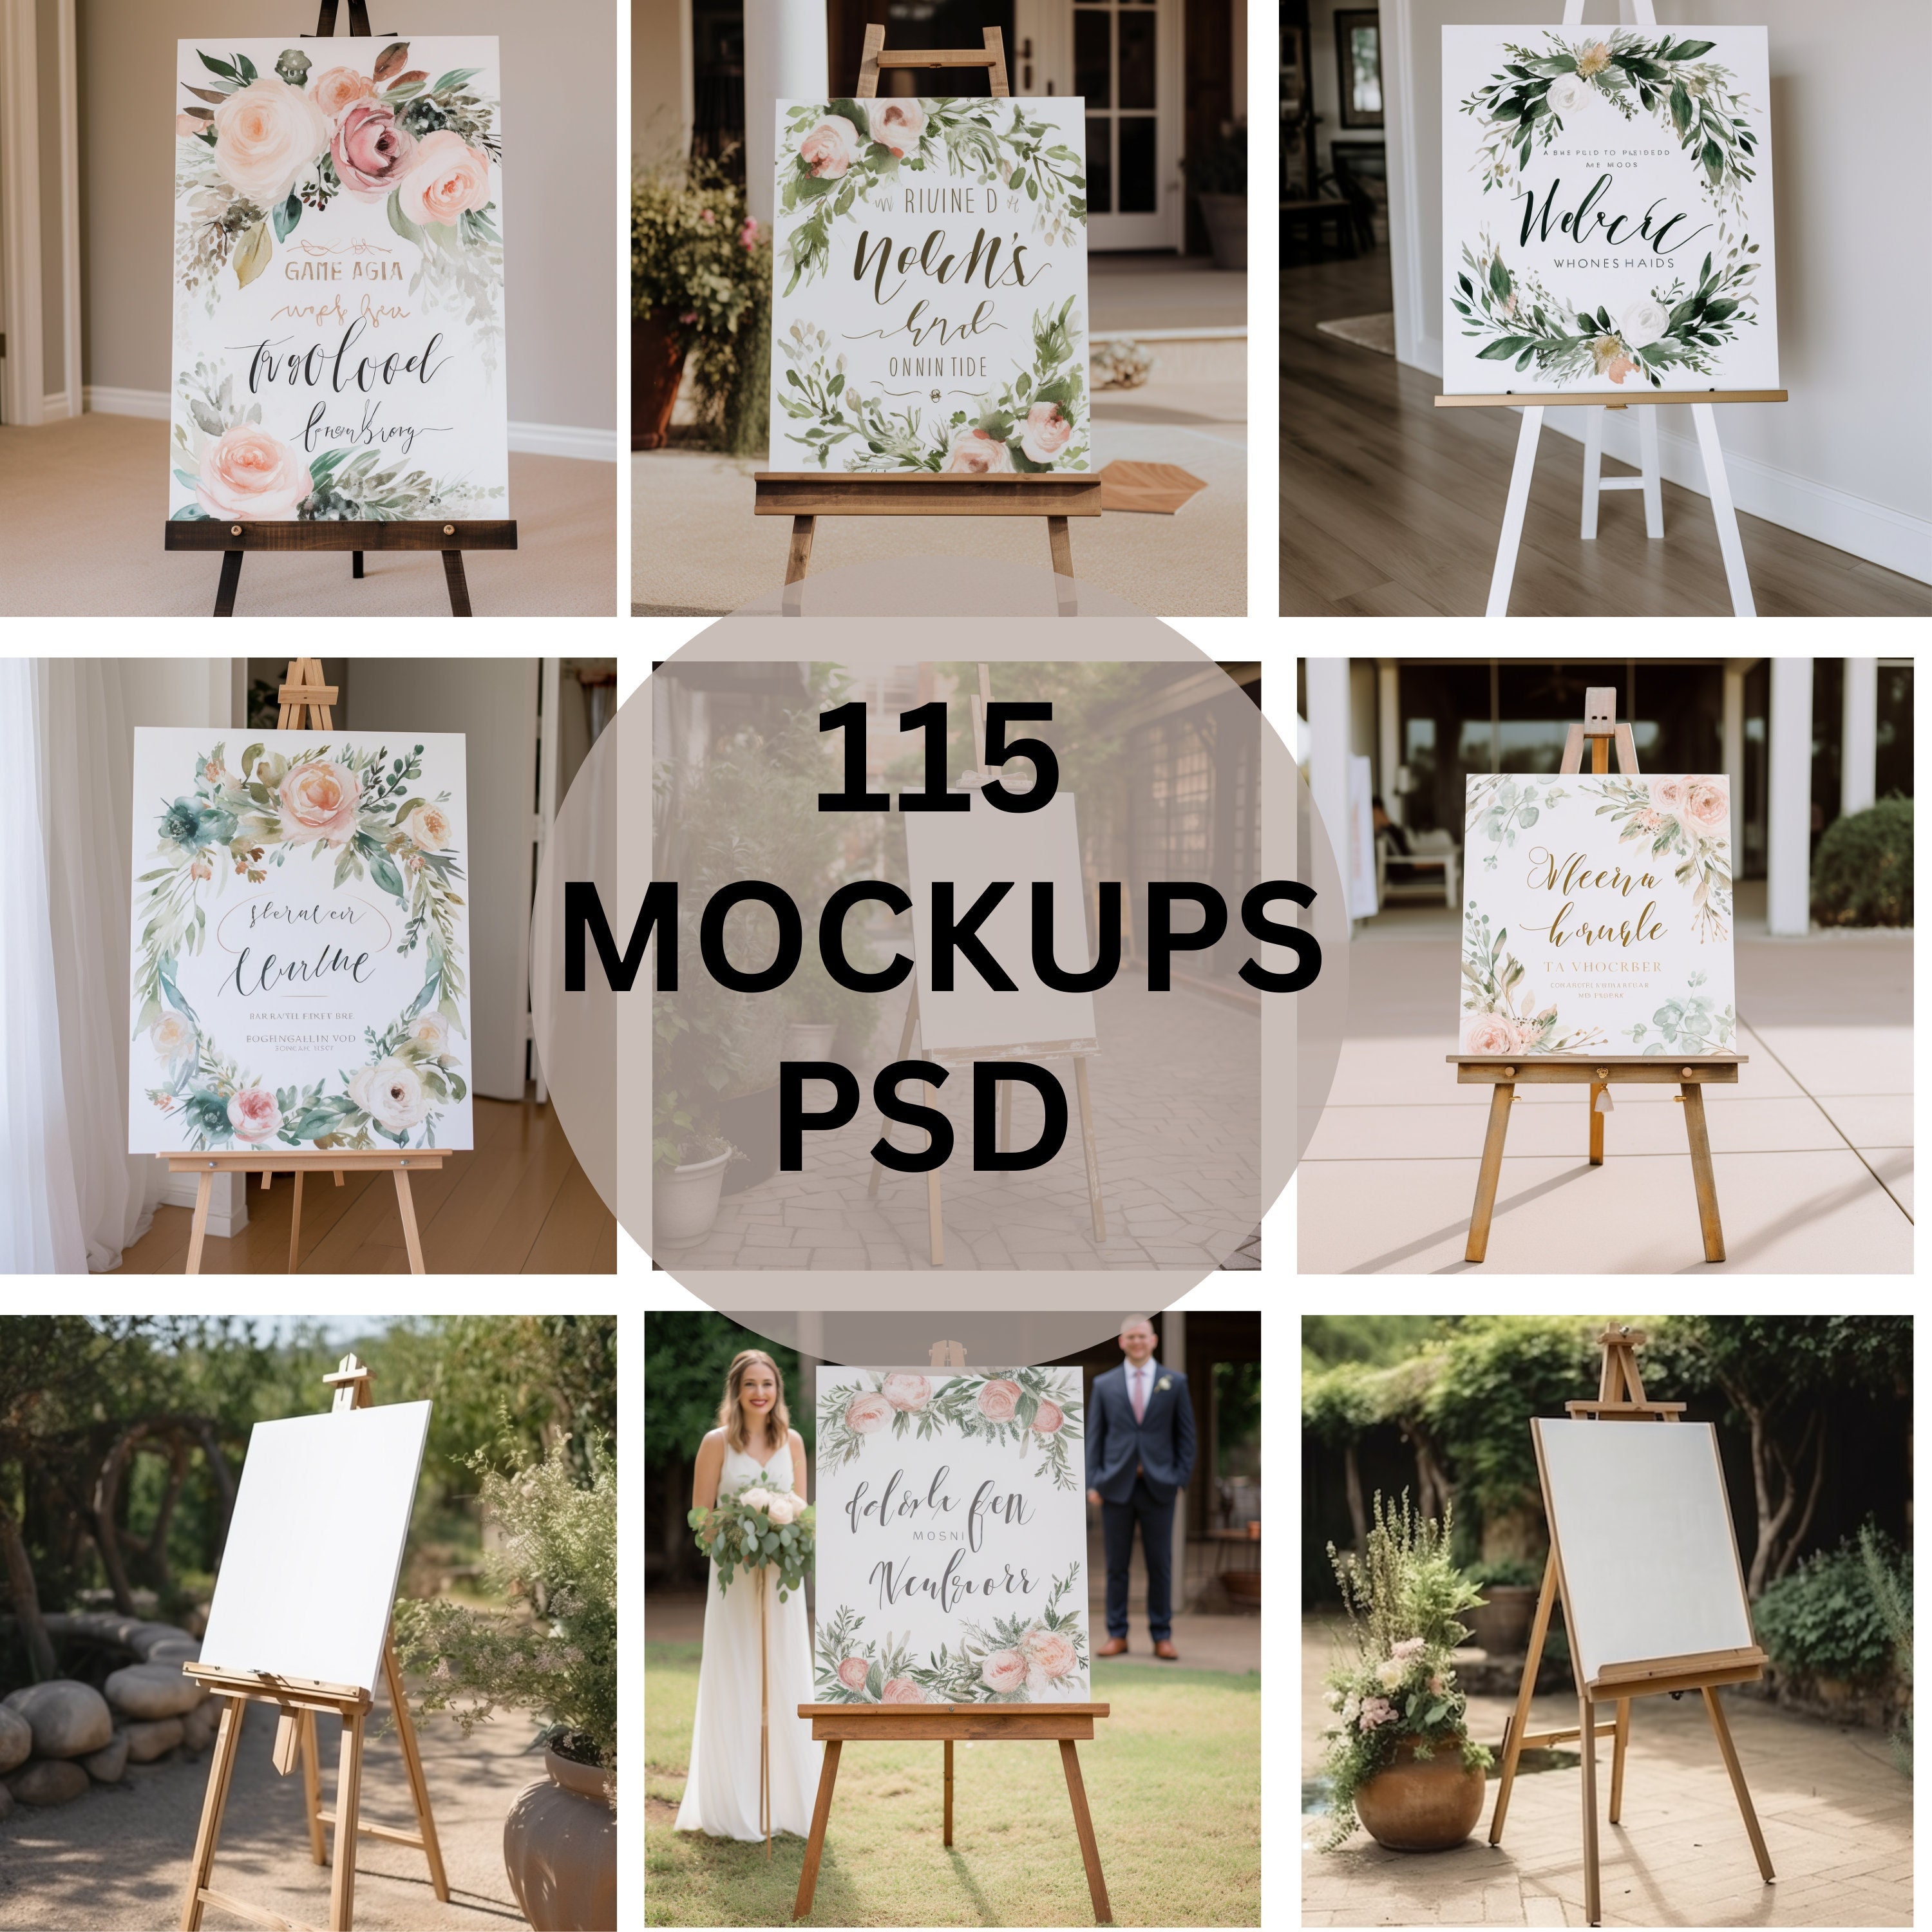 18x24 Poster Mockup, Poster Easel Mockup, Easel Mockup, Event Sign